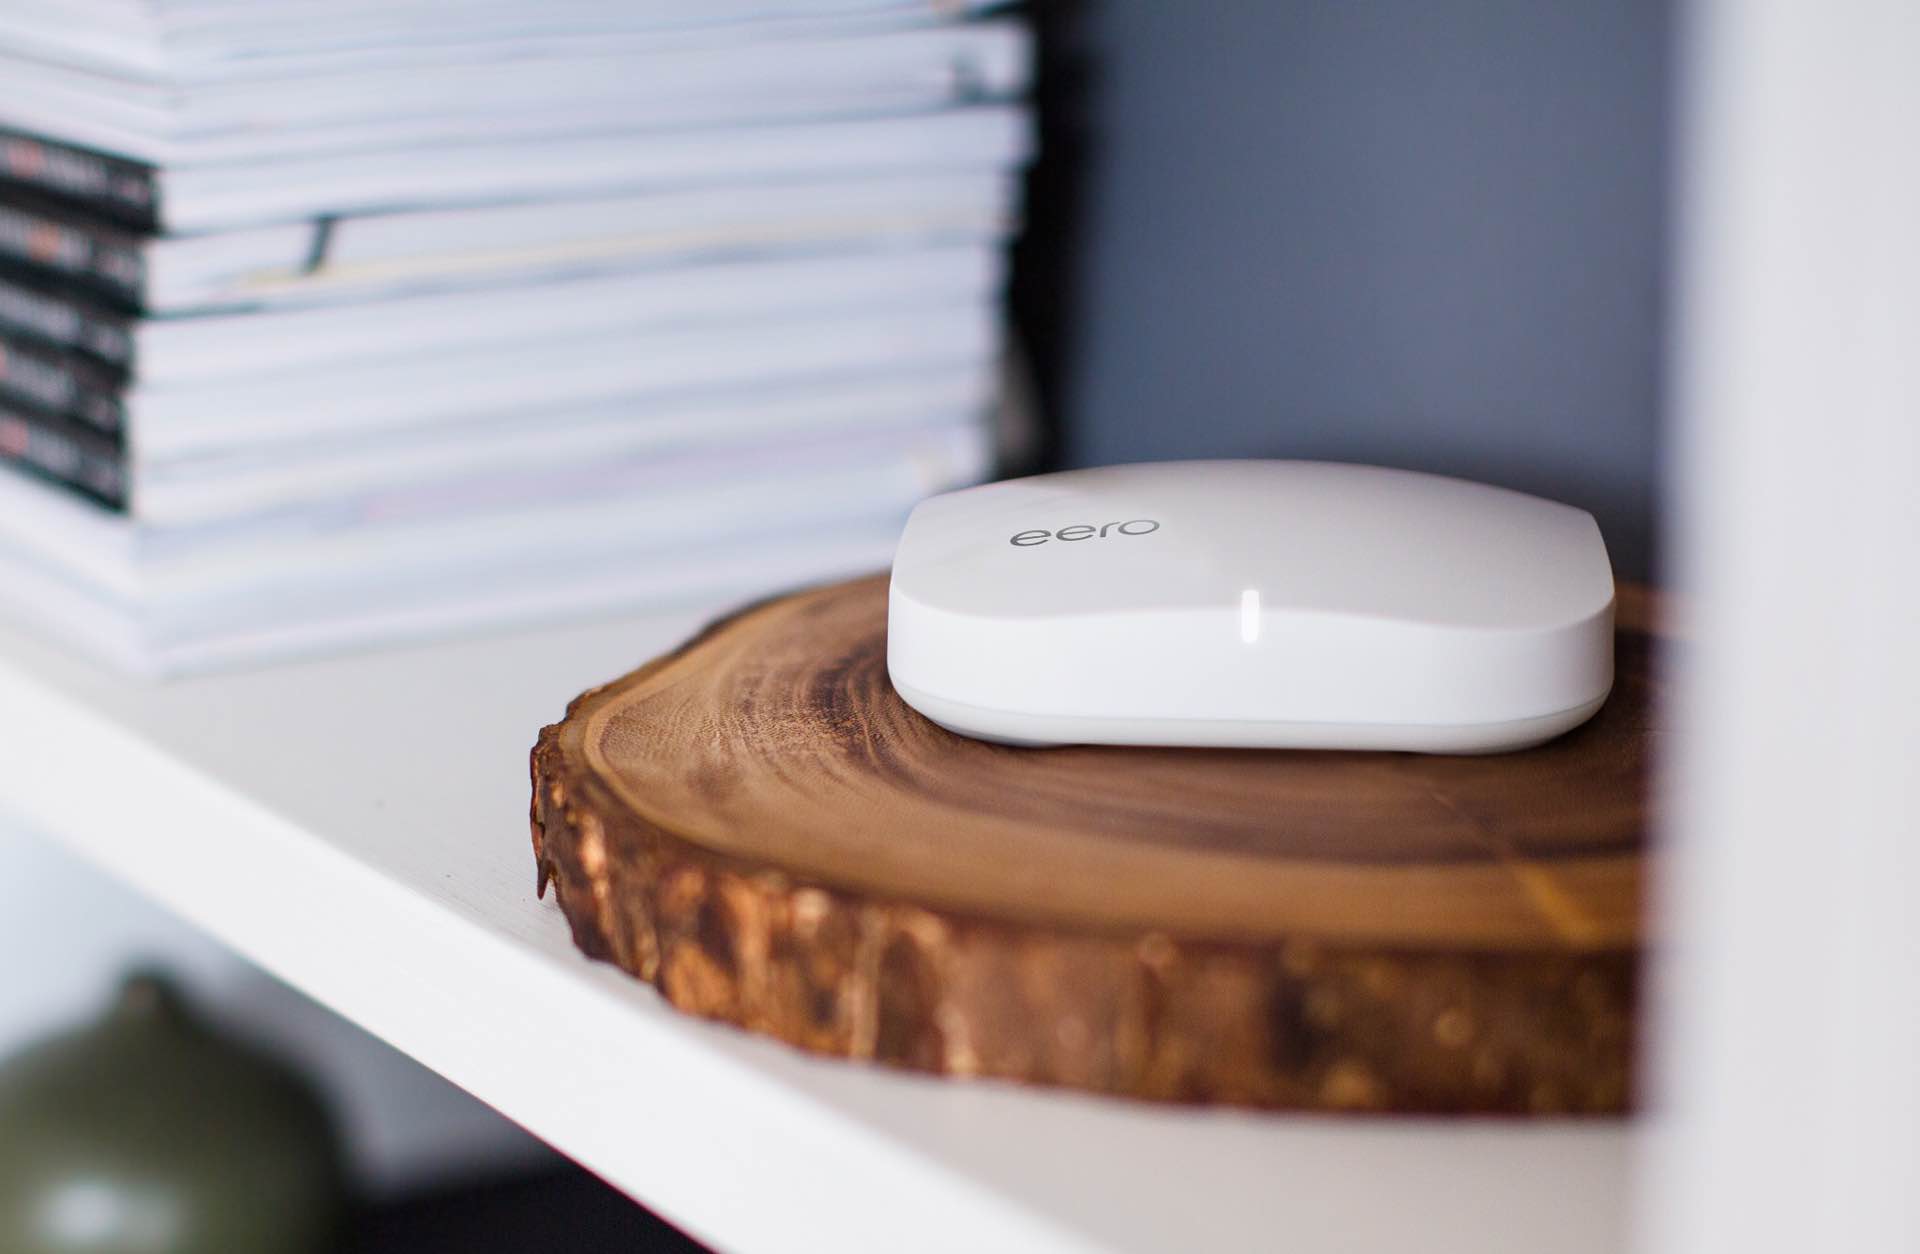 The eero home wi-fi system. ($499 for the [3-pack starter set](http://www.amazon.com/dp/B00XEW3YD6?tag=toolsandtoys-20), or $190 for an [individual node](http://www.amazon.com/dp/B00Y01VRSO?tag=toolsandtoys-20))